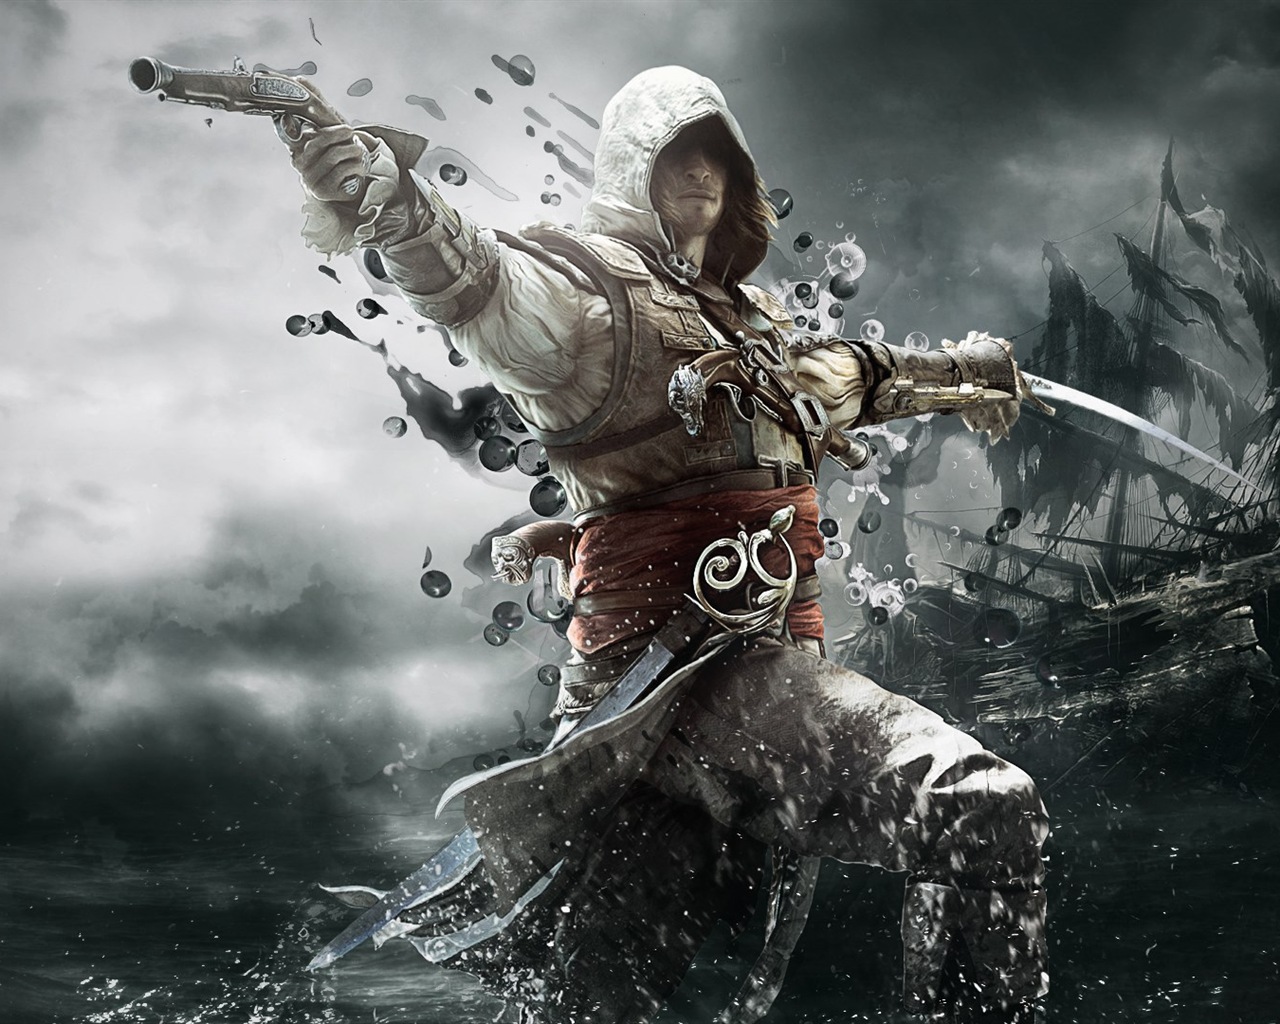 Creed IV Assassin: Black Flag HD wallpapers #8 - 1280x1024